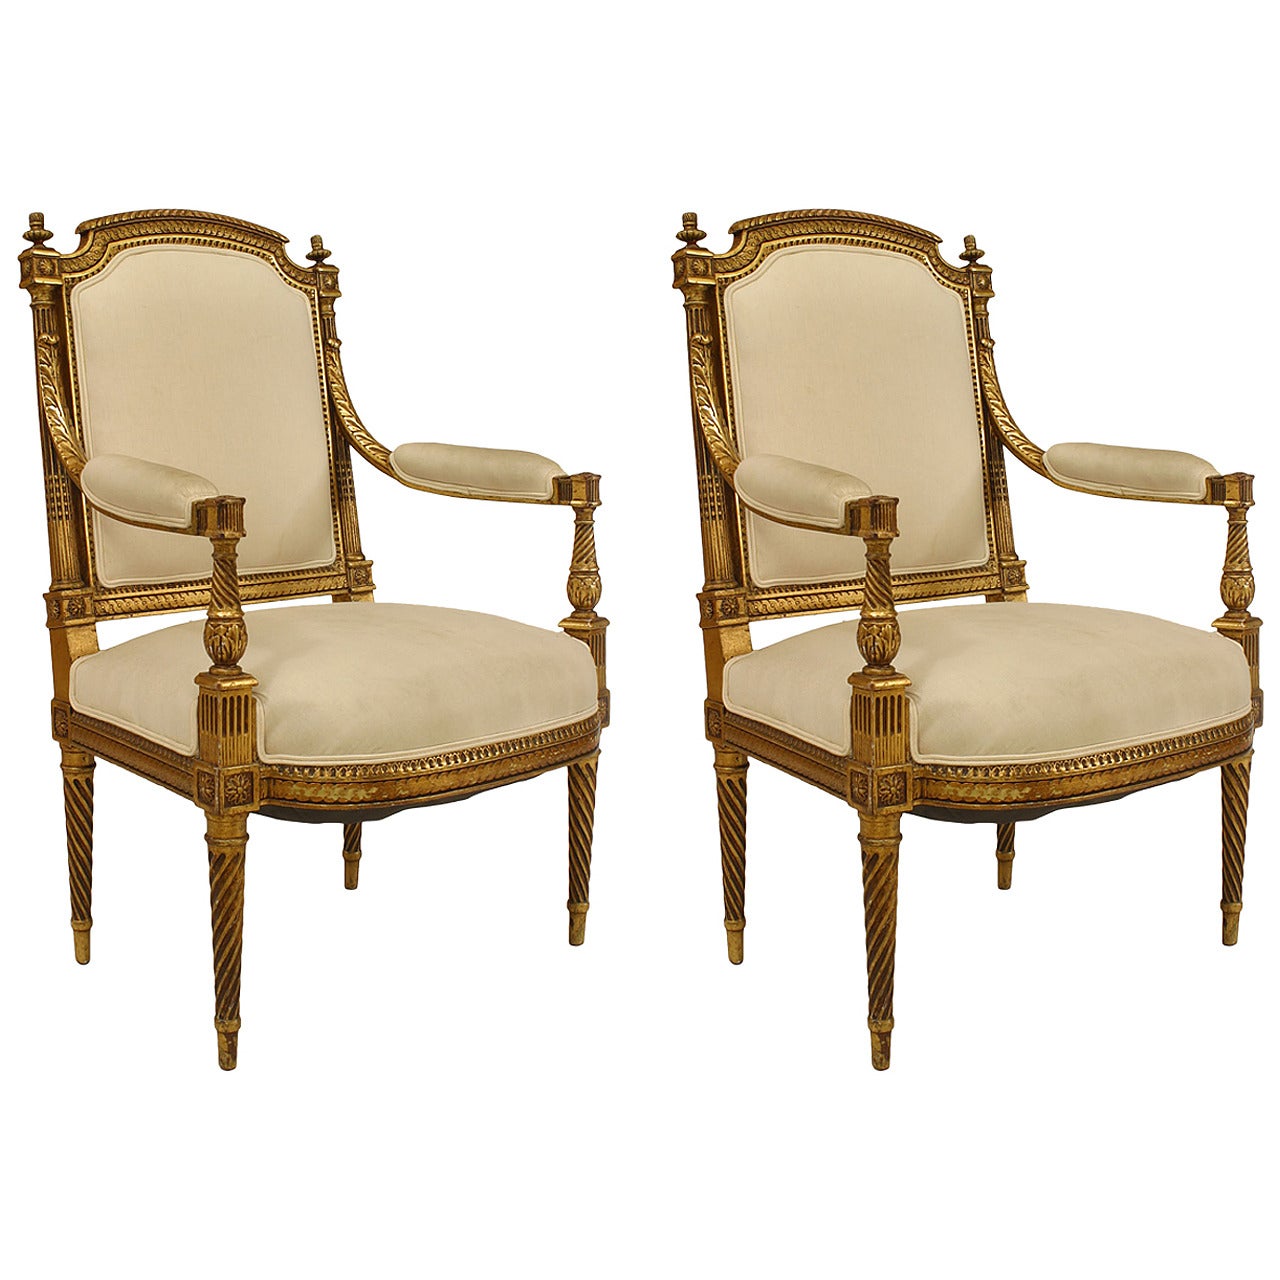 Pair of 19th Century French Louis XVI Gilt Carved Armchairs